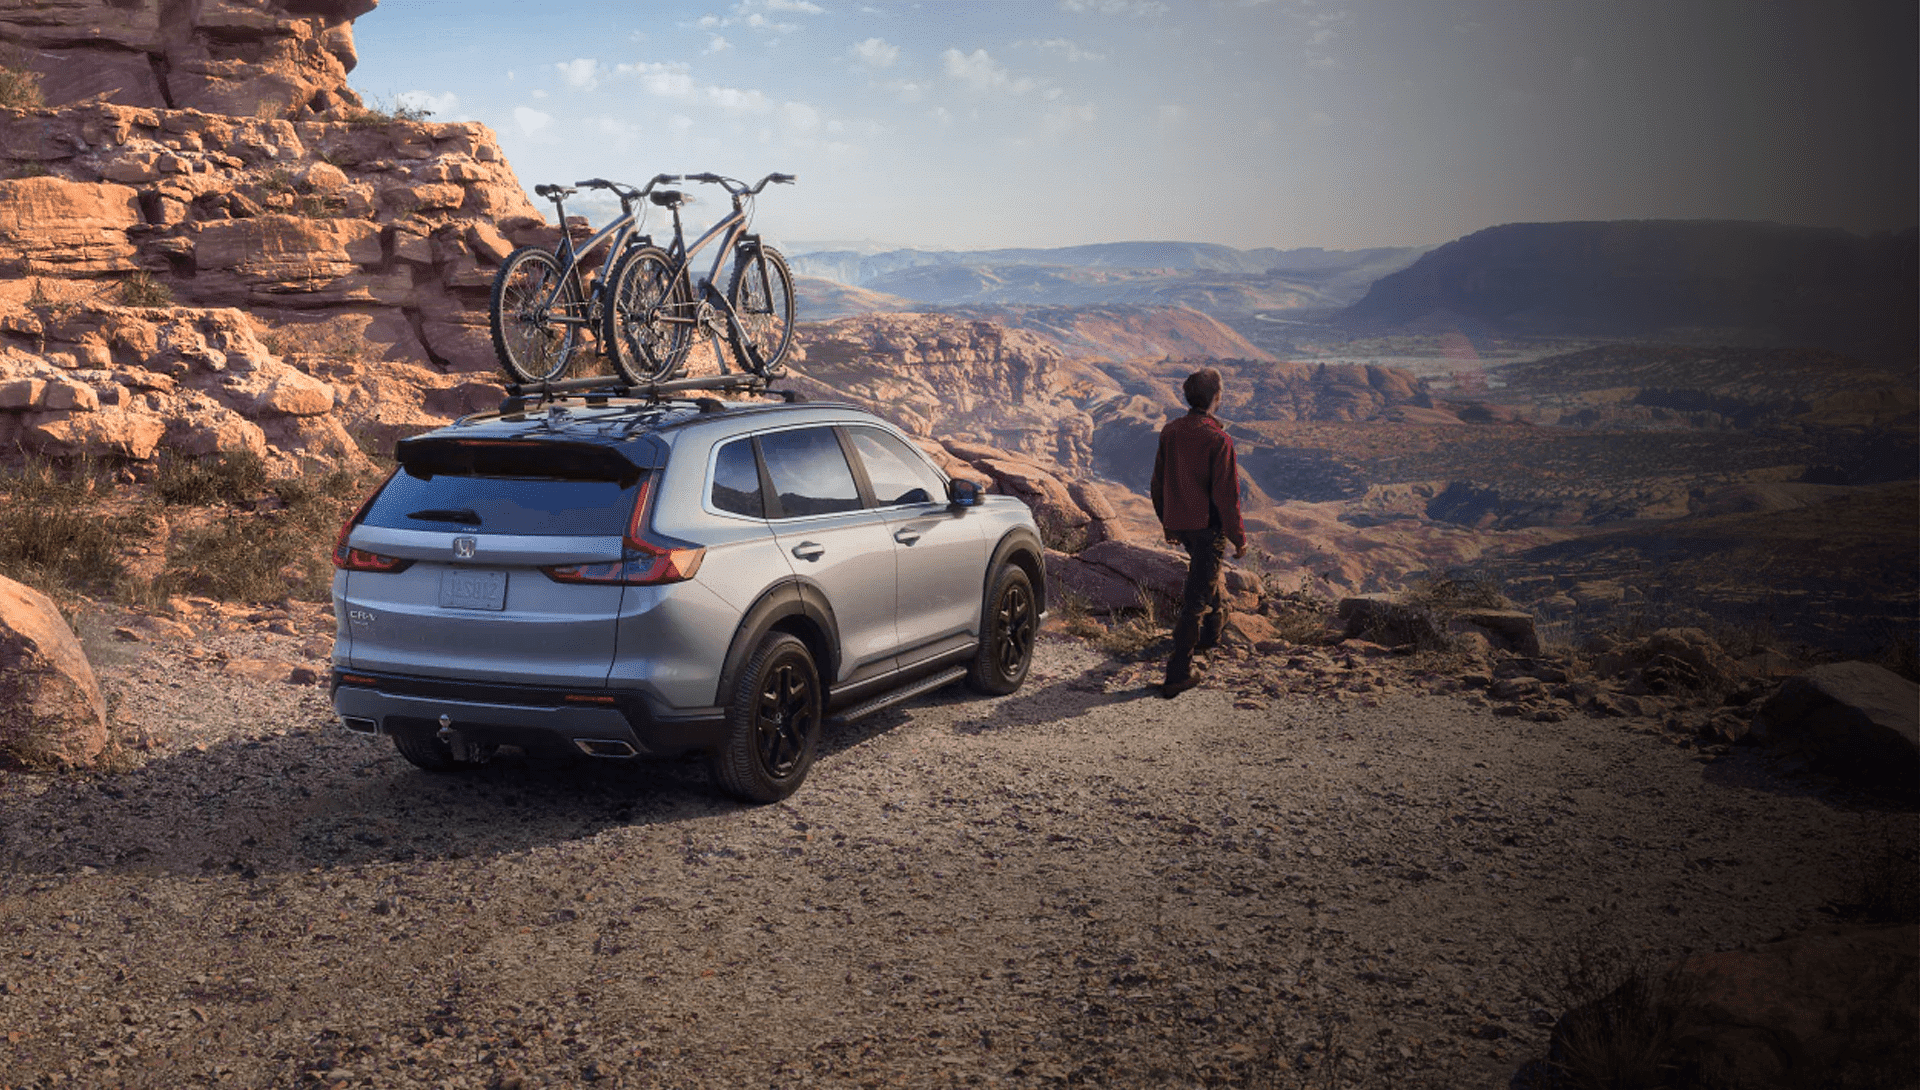 Honda CR-V parked on the edge of the canyon